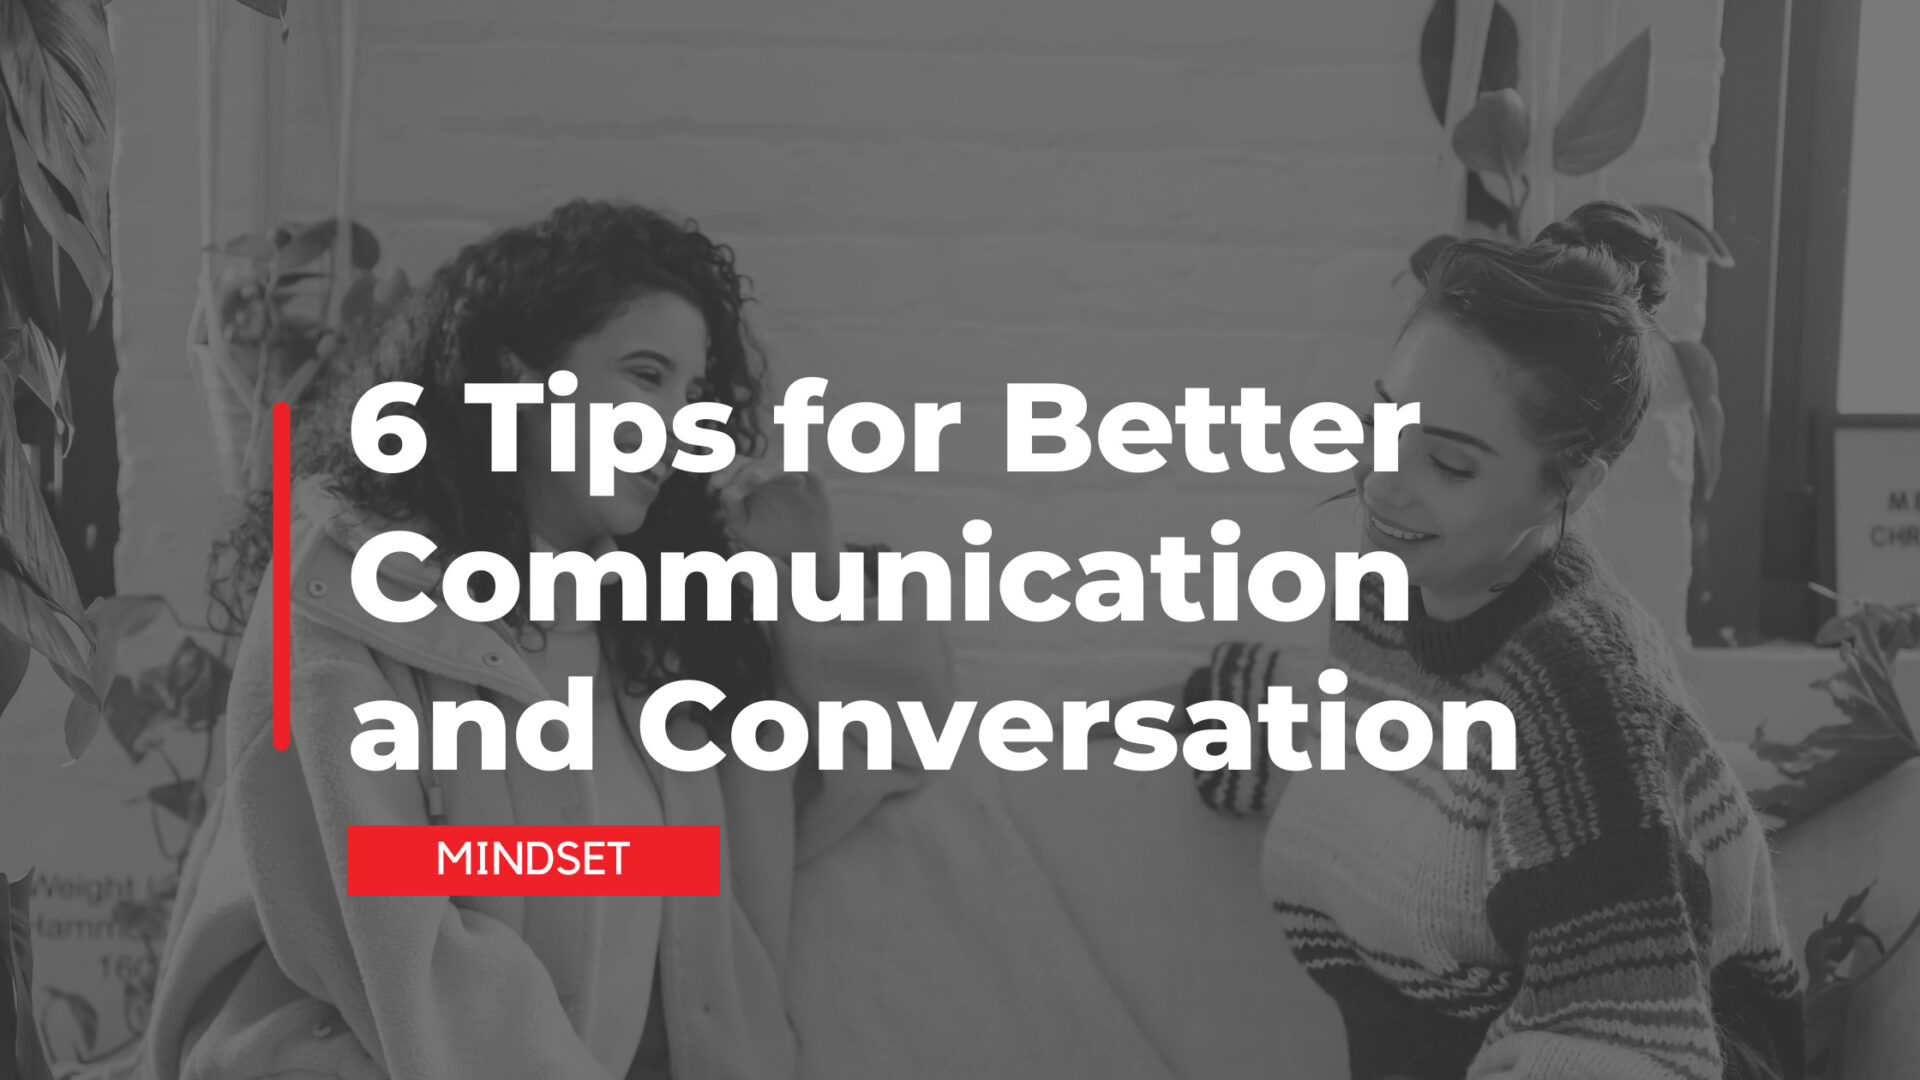 6 Tips for Better Communication and Conversation